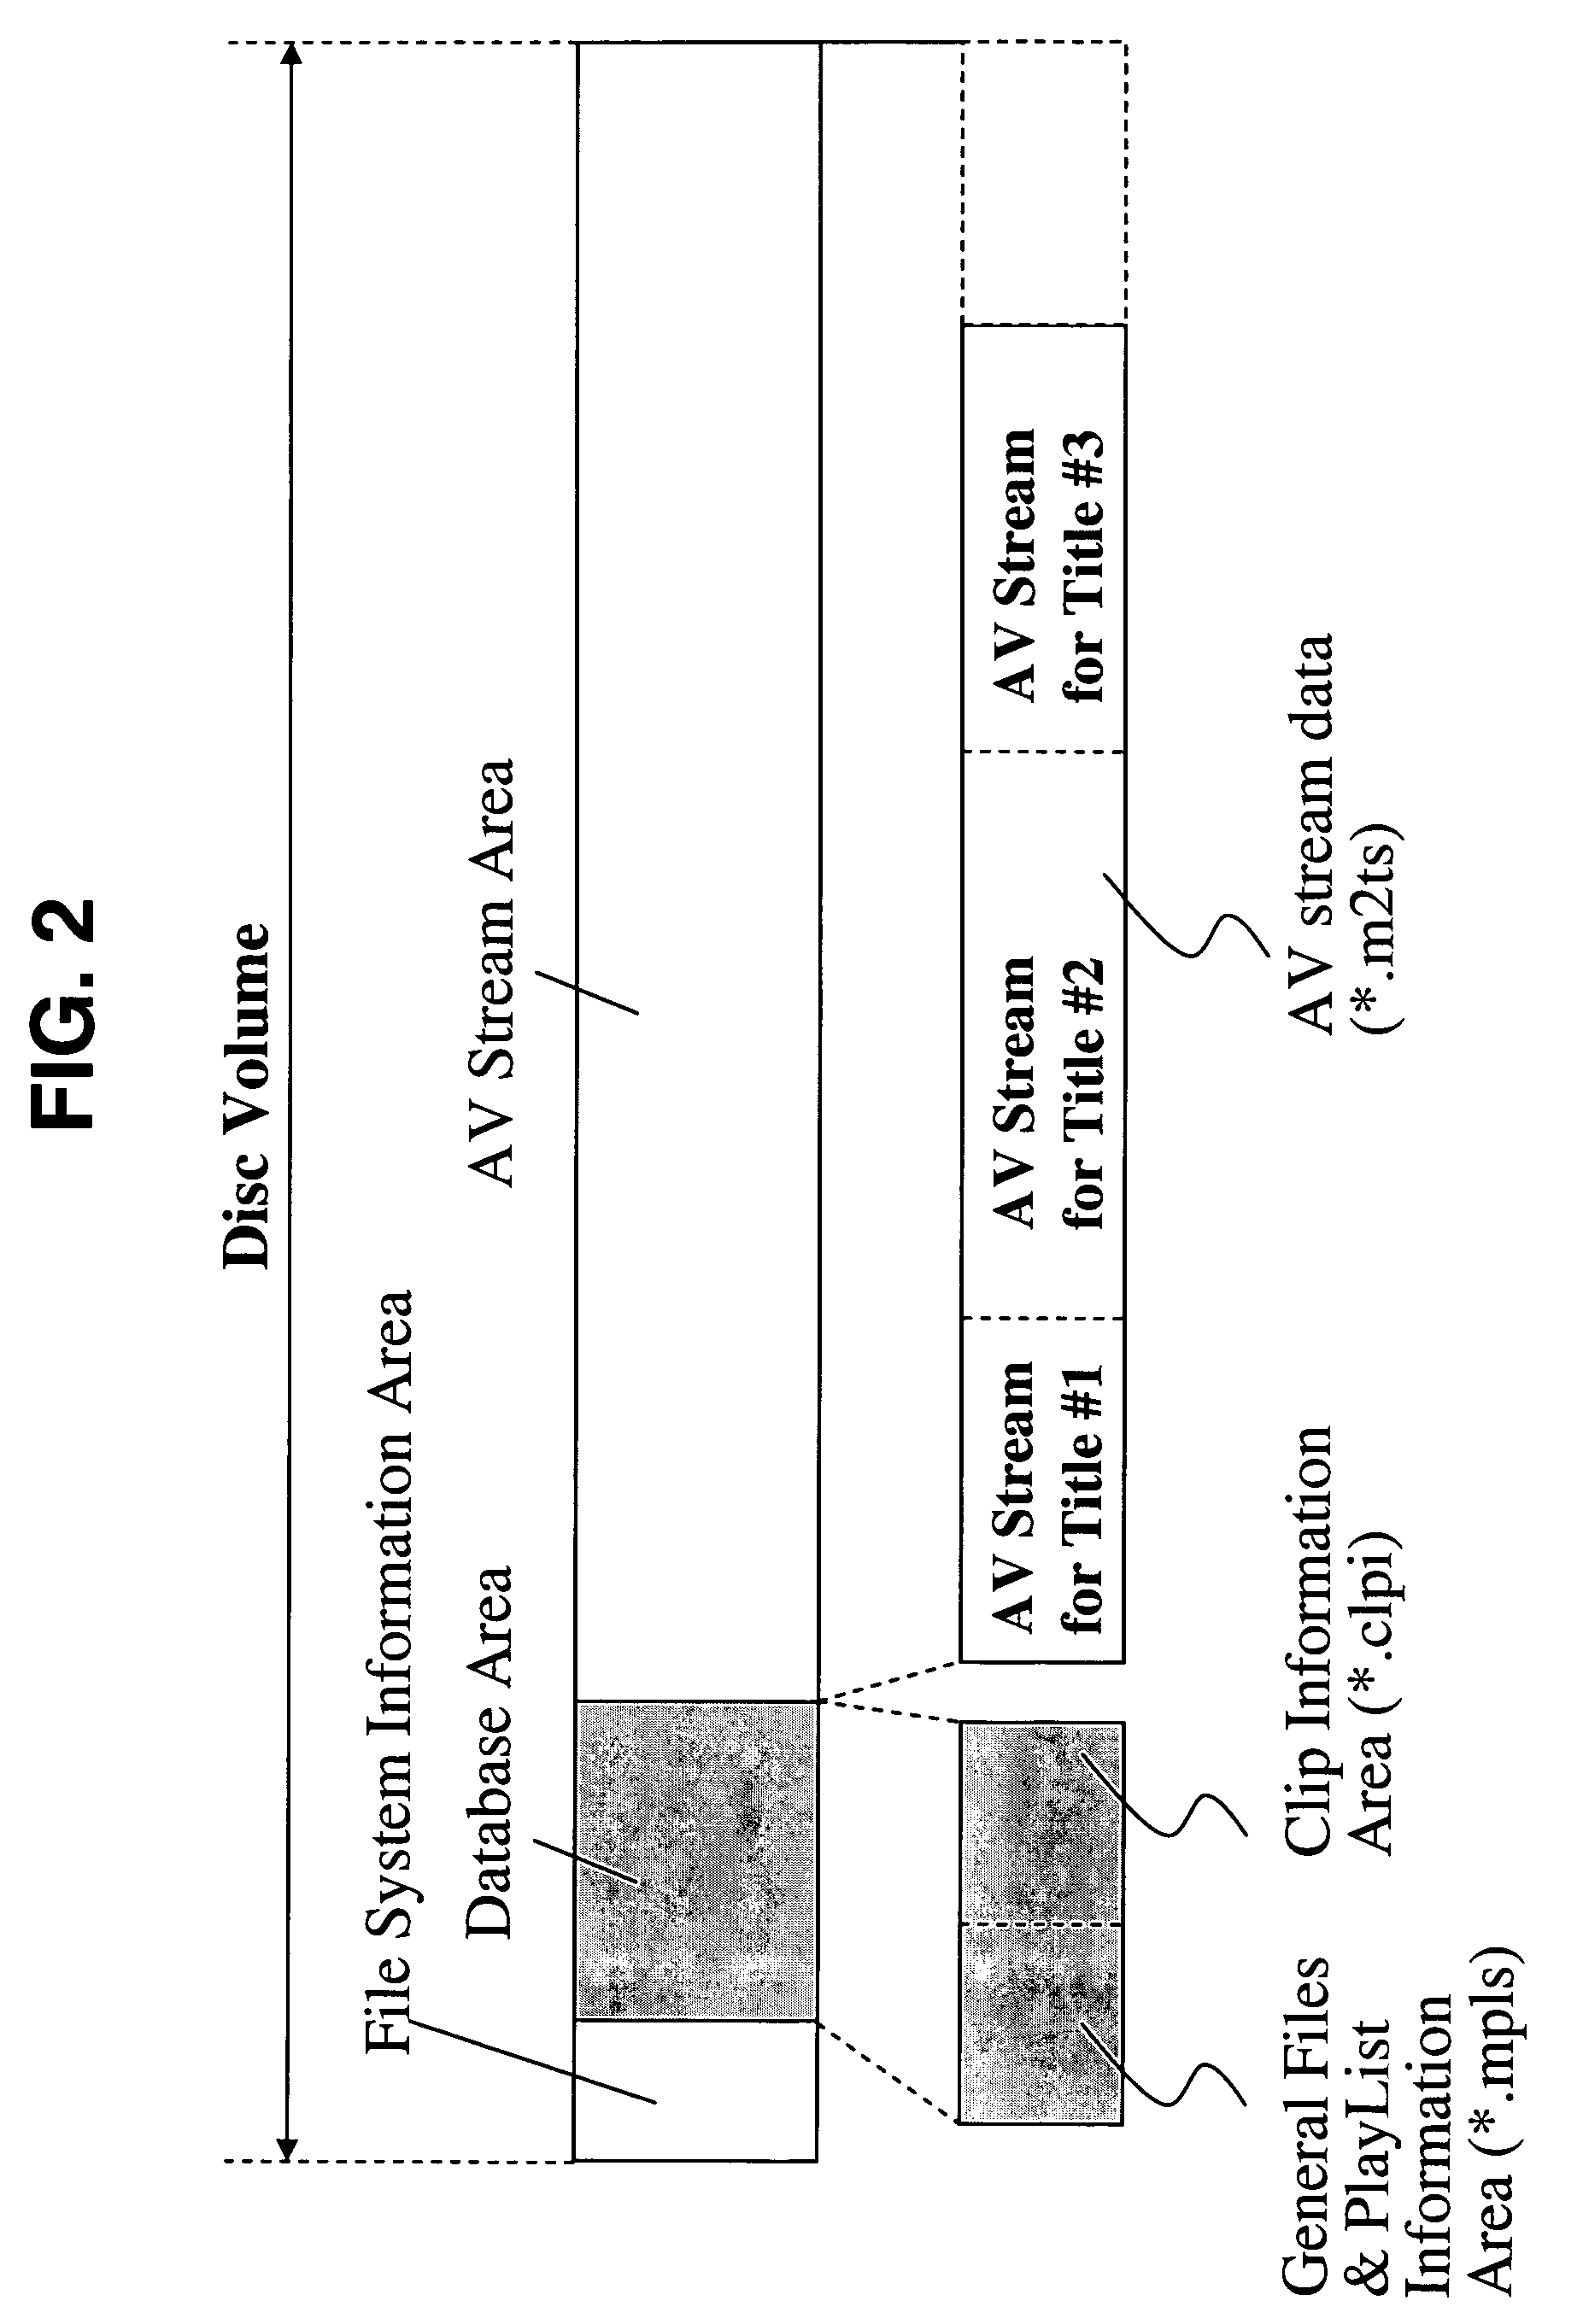 Recording medium having data structure for managing reproduction of still images recorded thereon and recording and reproducing methods and apparatuses